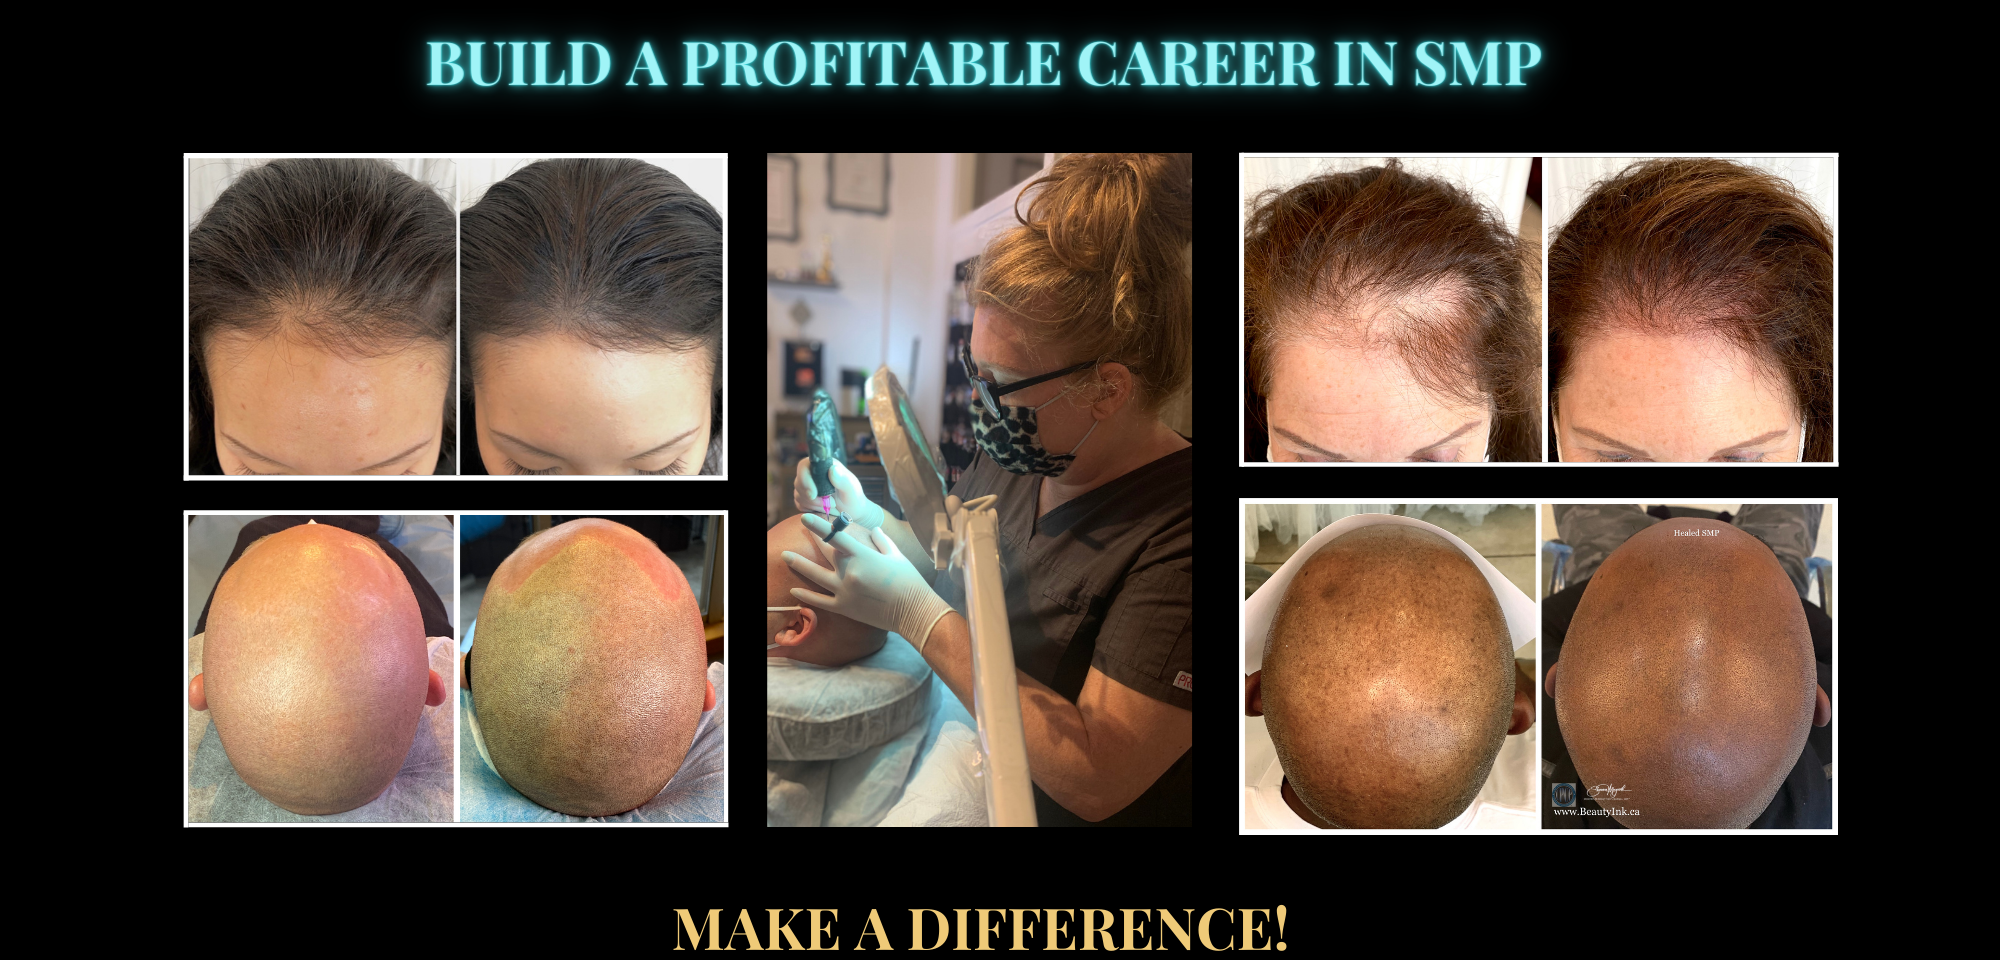 Build a profitable carrer in SMP scalp Micro-pigmnetation, Learn smp, Make a positive diffrence in peoples lives, learn hairloss solutions.